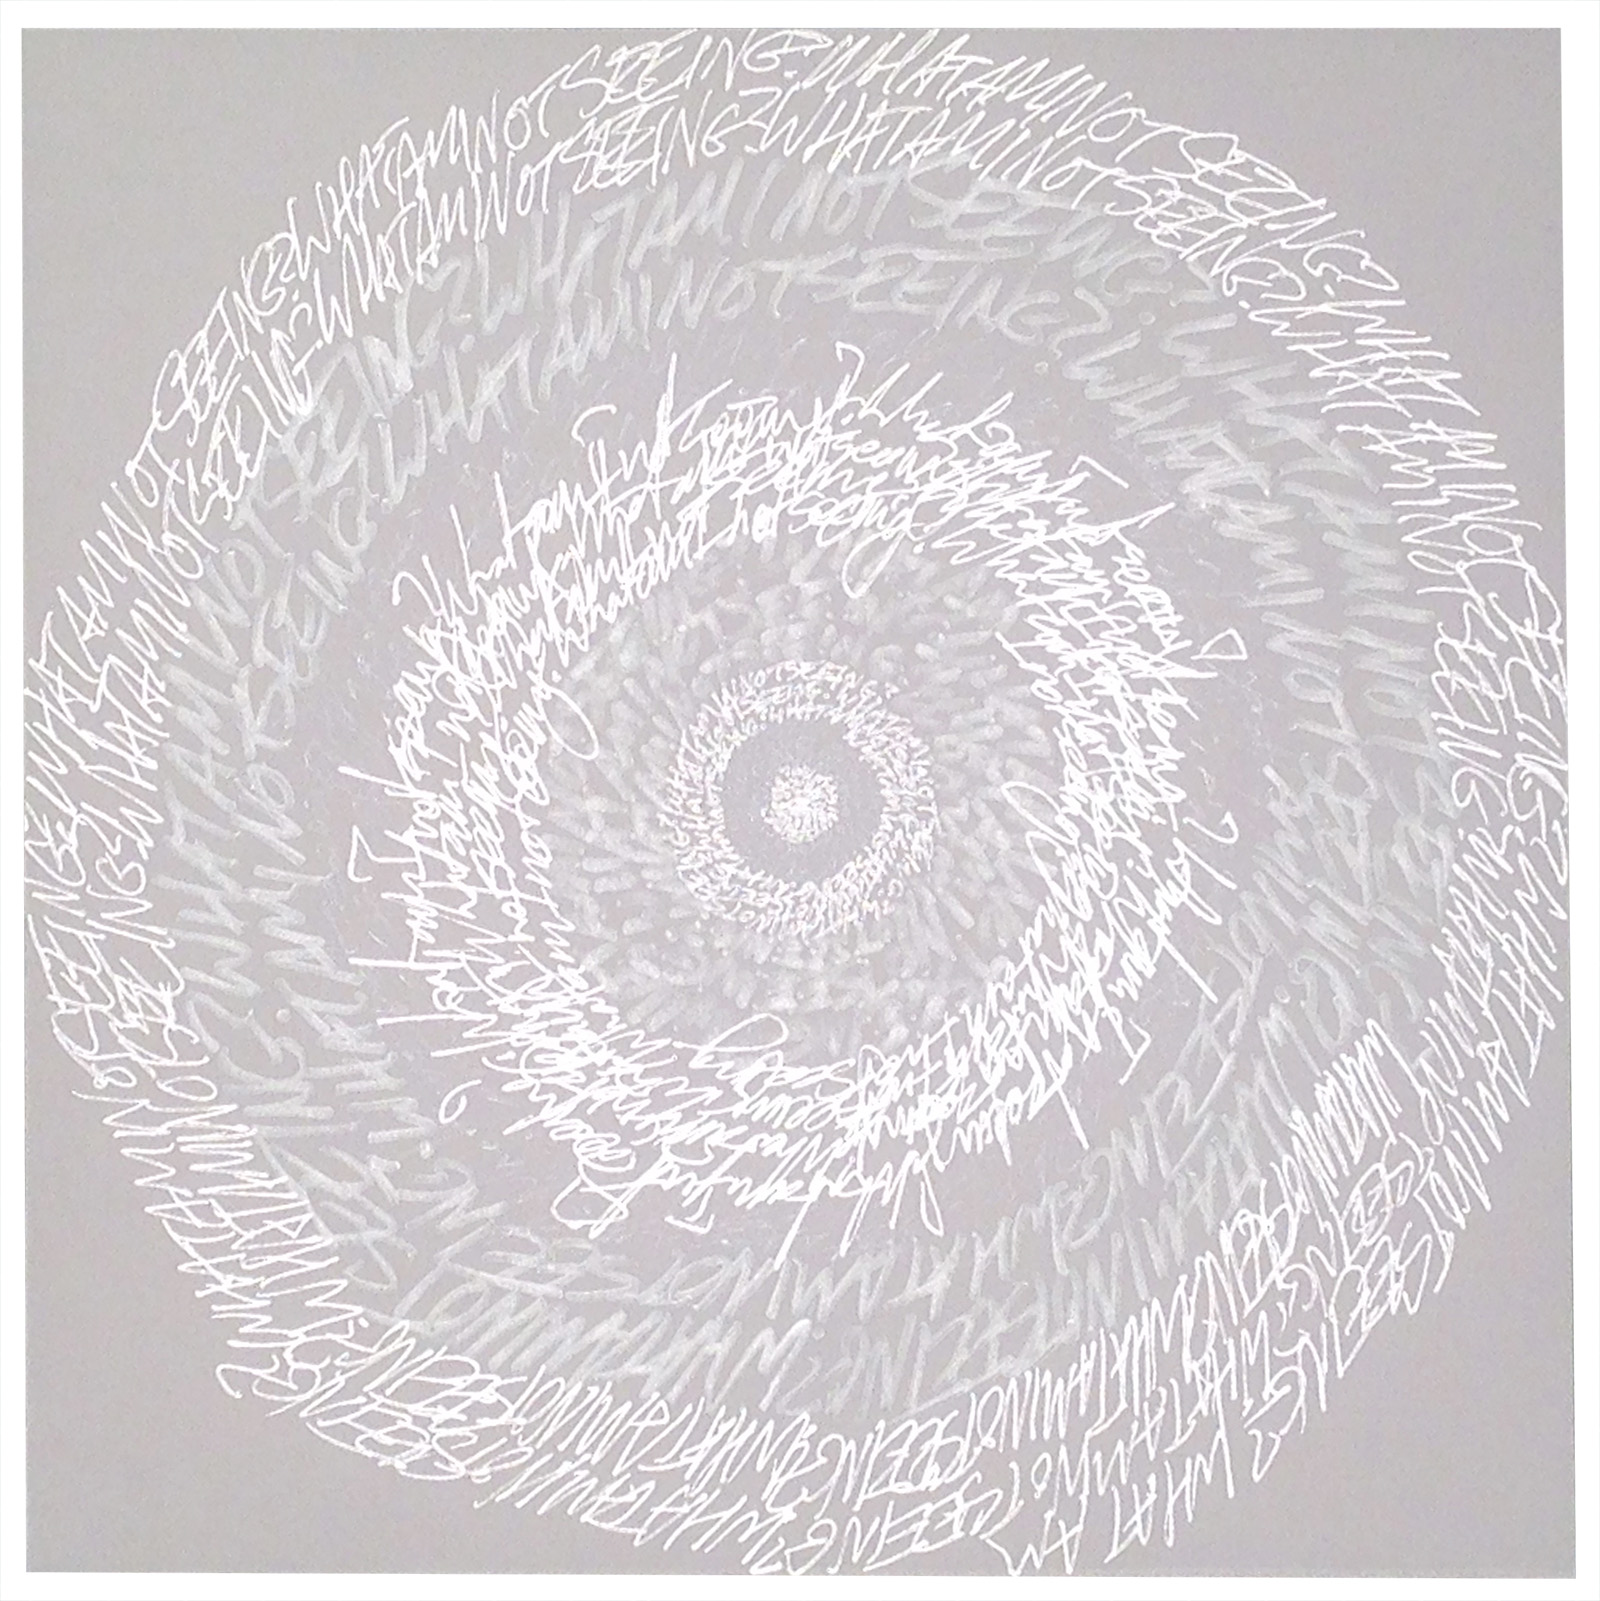  “Energy Spiral—What Am I Not Seeing?,” 2014, marker and pen on paper, 10in. x 10in.